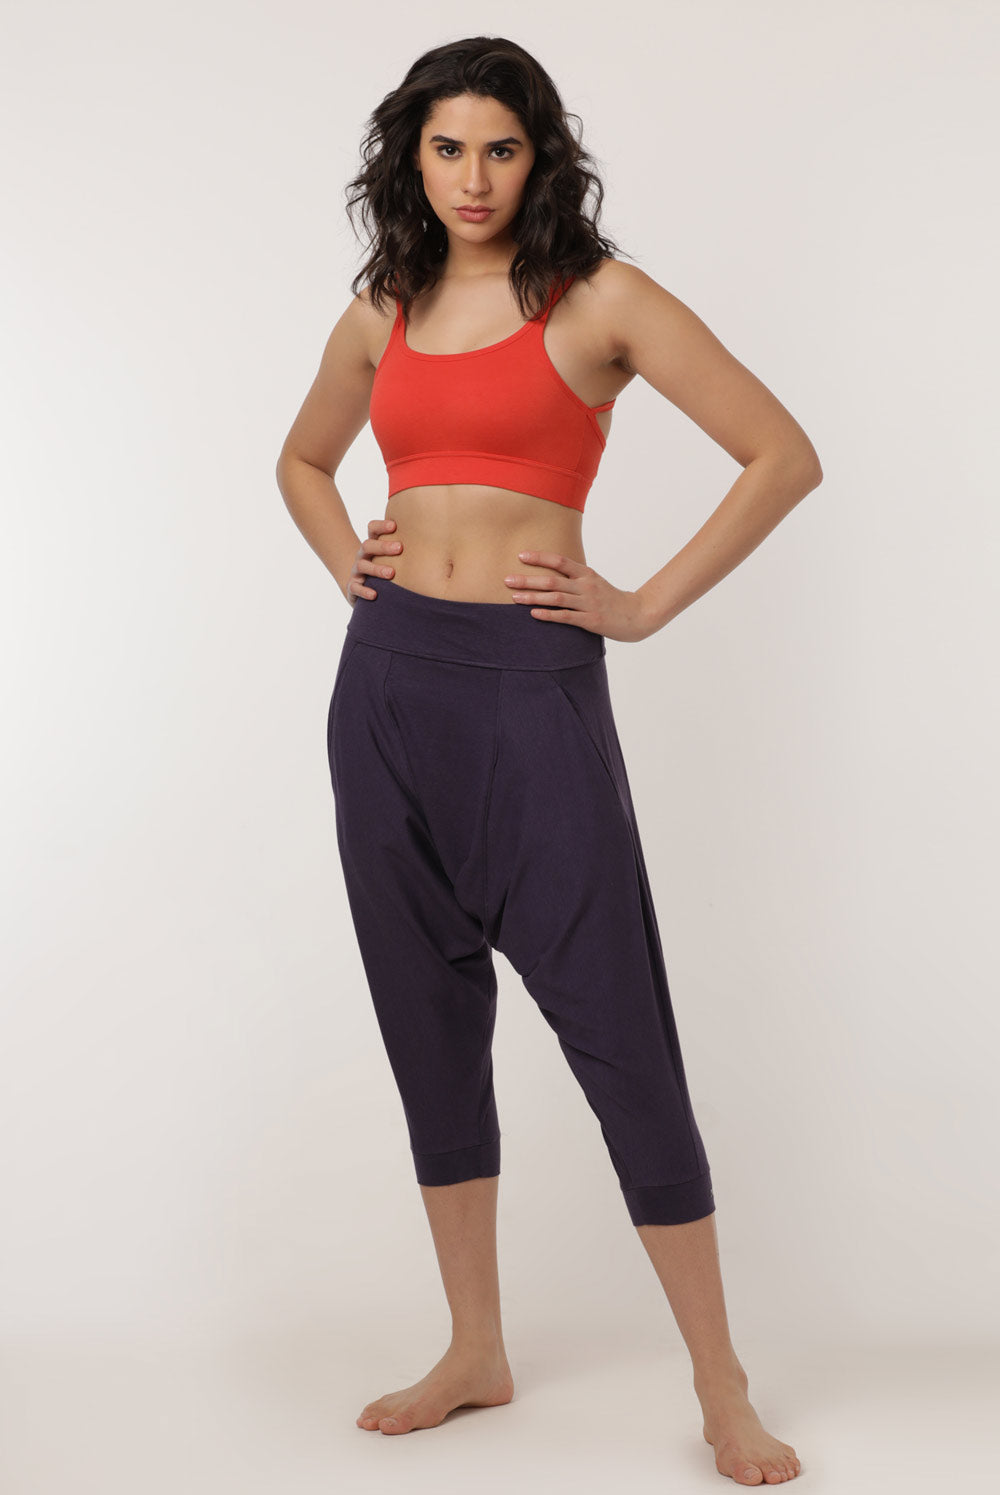 Yoga and Active Wear for Women. Bras, Tanks, Tops, Tights, Dhotis